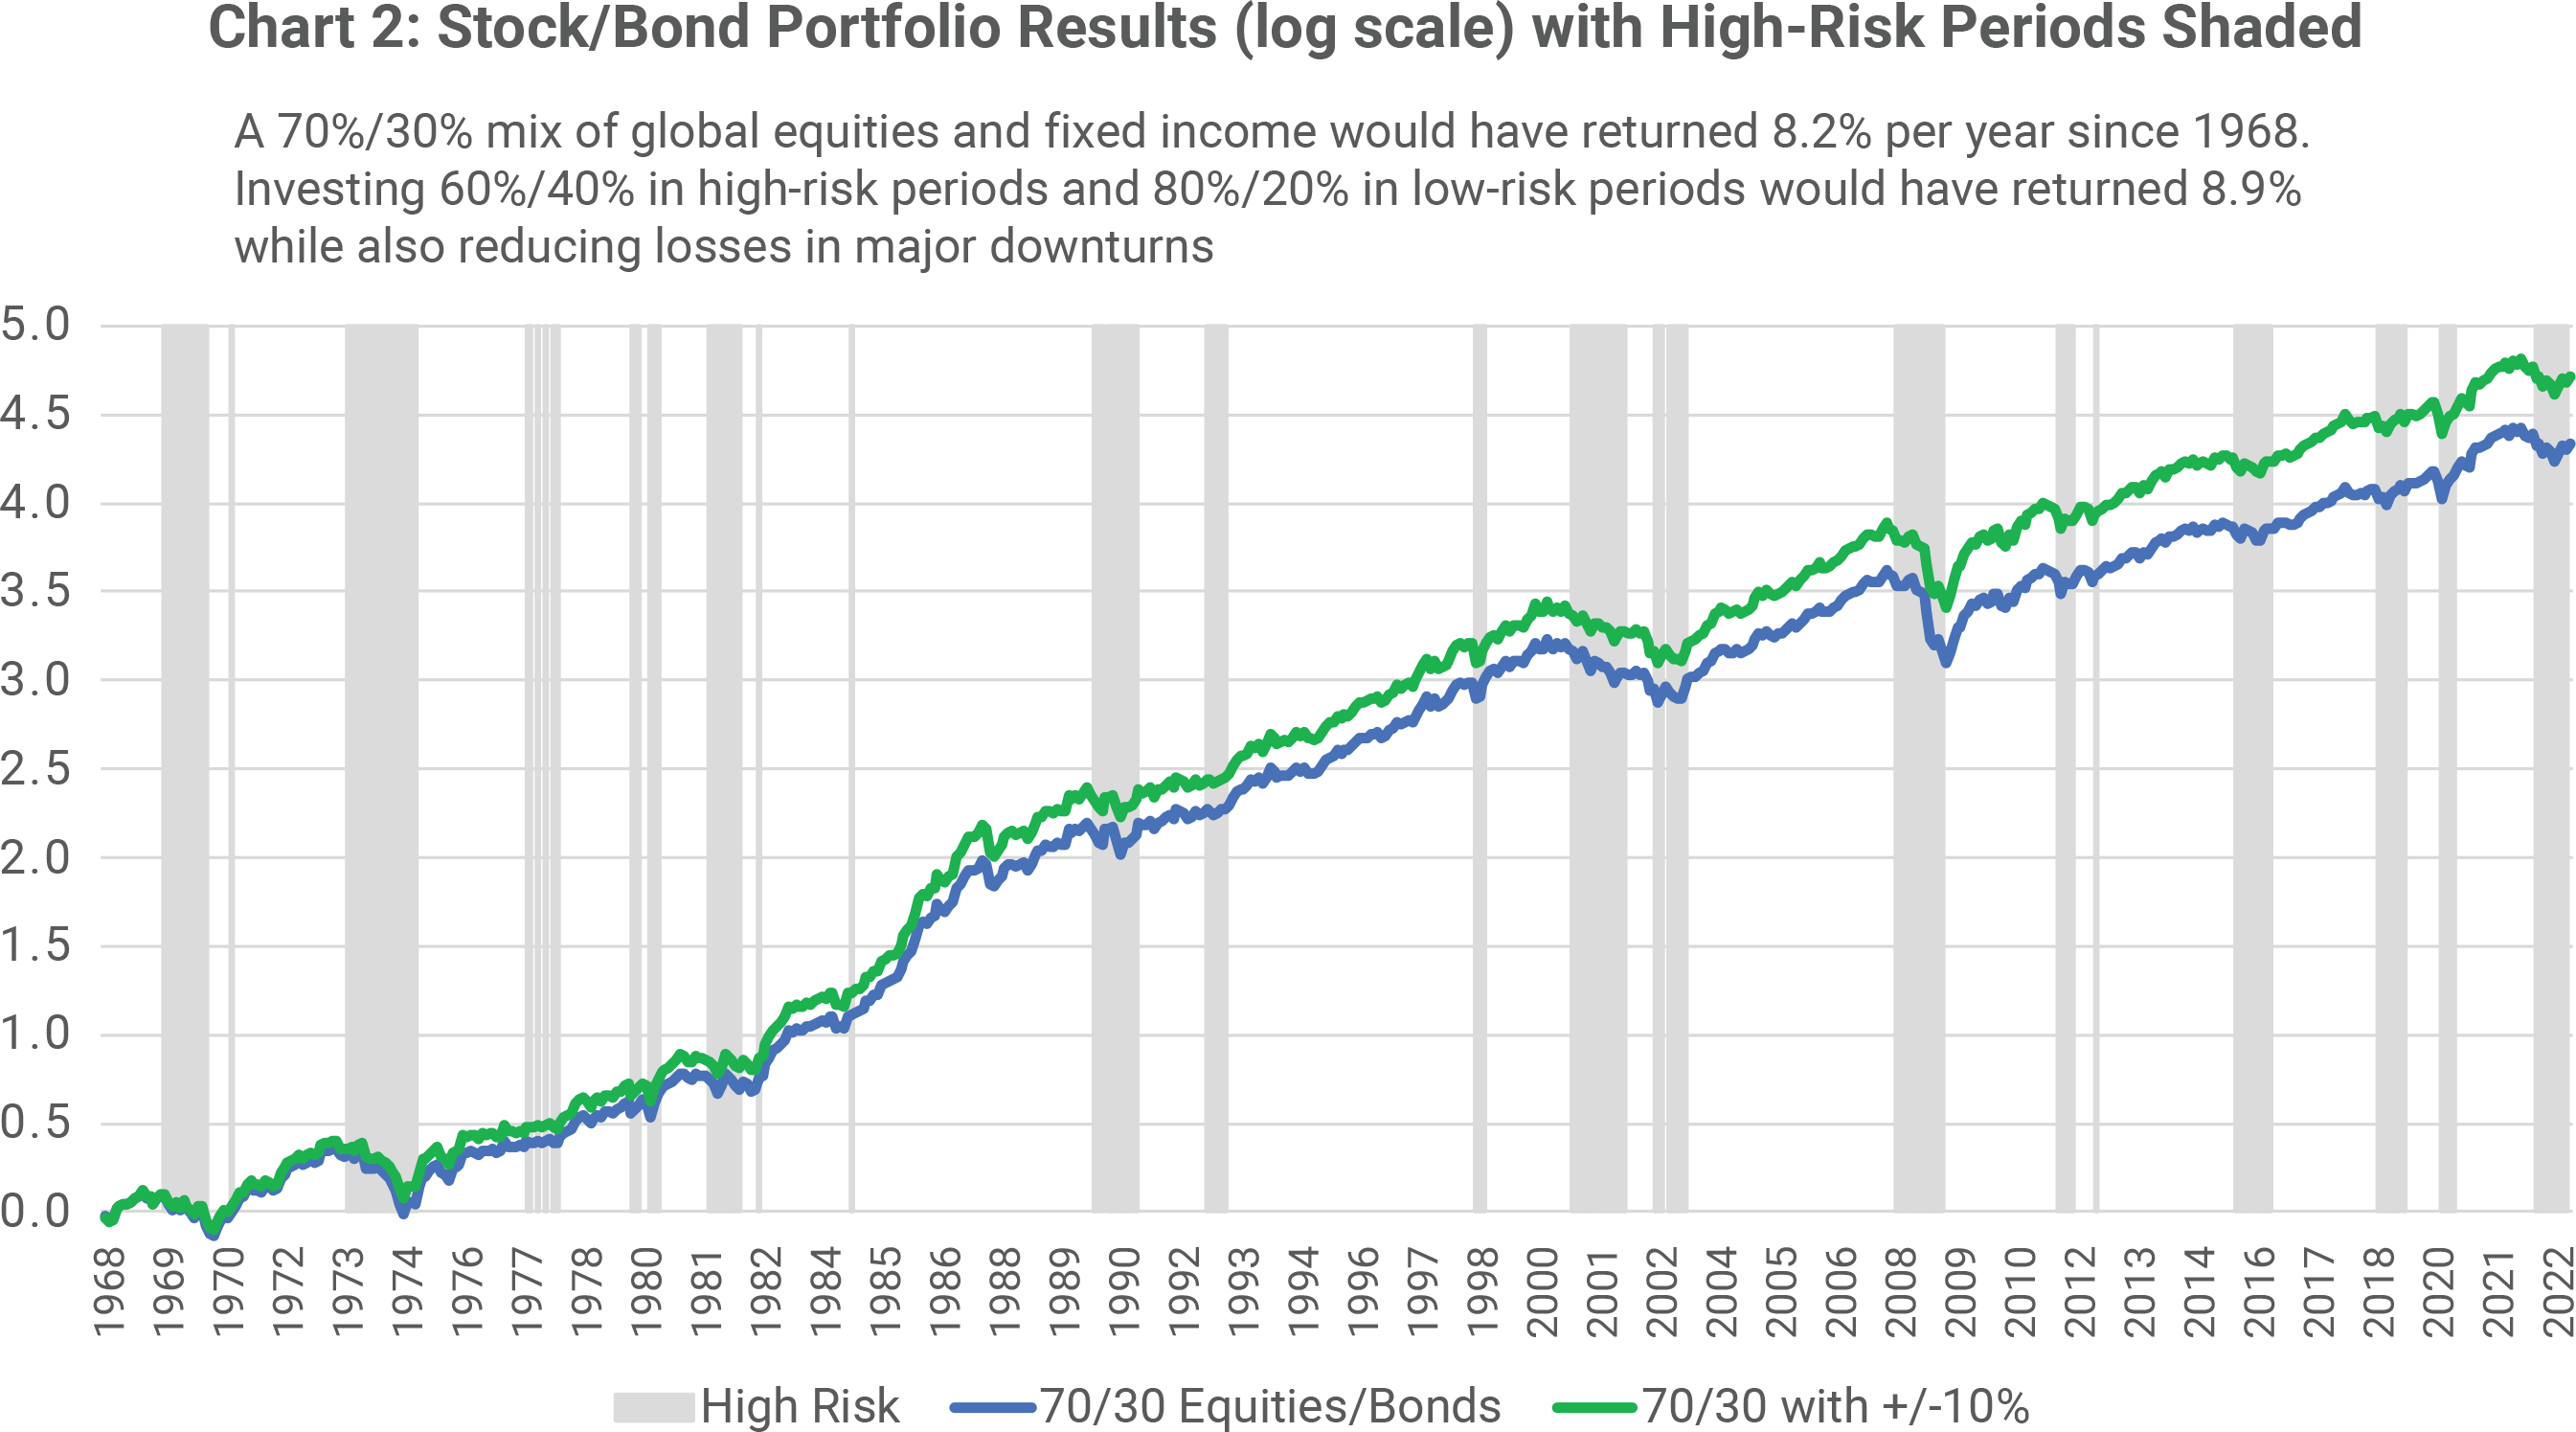 Chart 2: Stock/Bond Portfolio Results (log scale) with High-Risk Periods Shaded